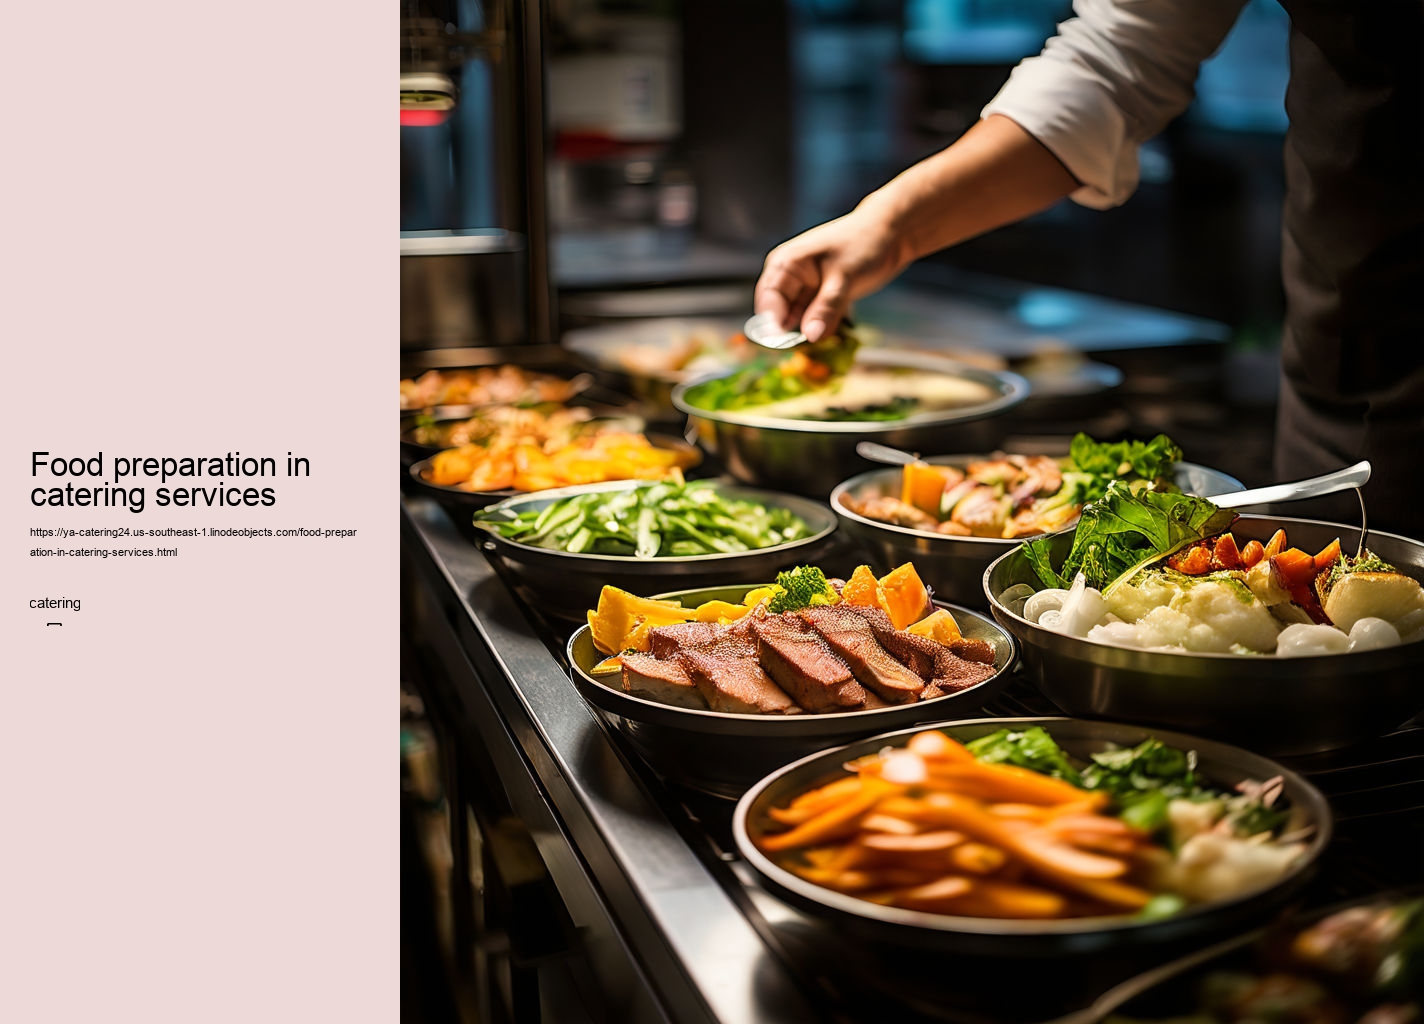 Food preparation in catering services